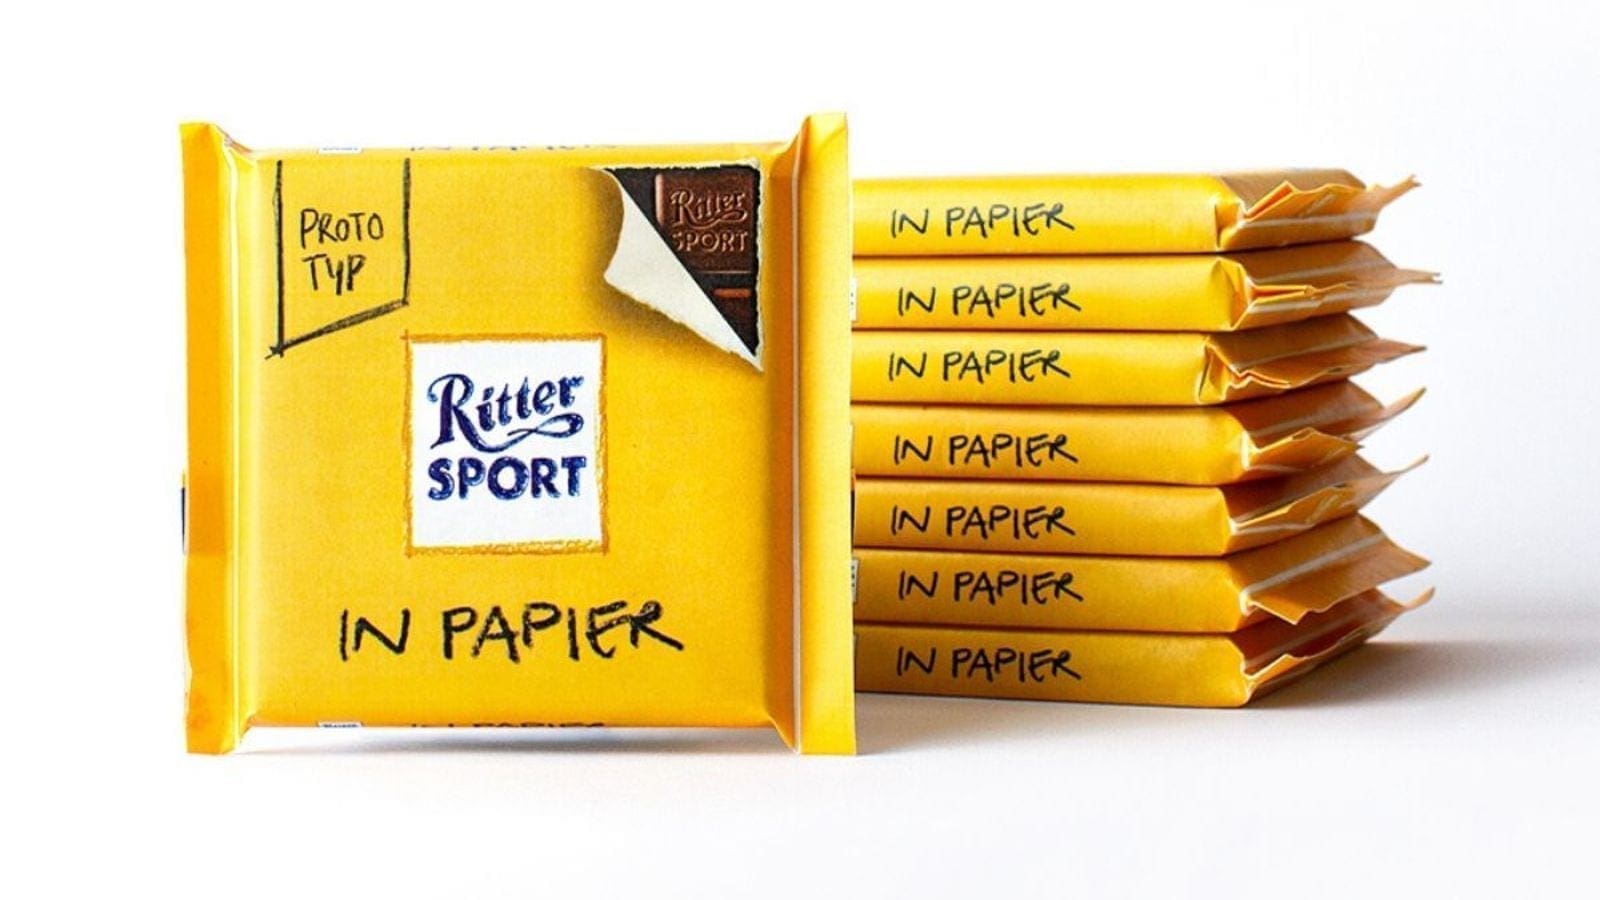 European chocolate brand Ritter Sport goes green with new paper-based wrappers